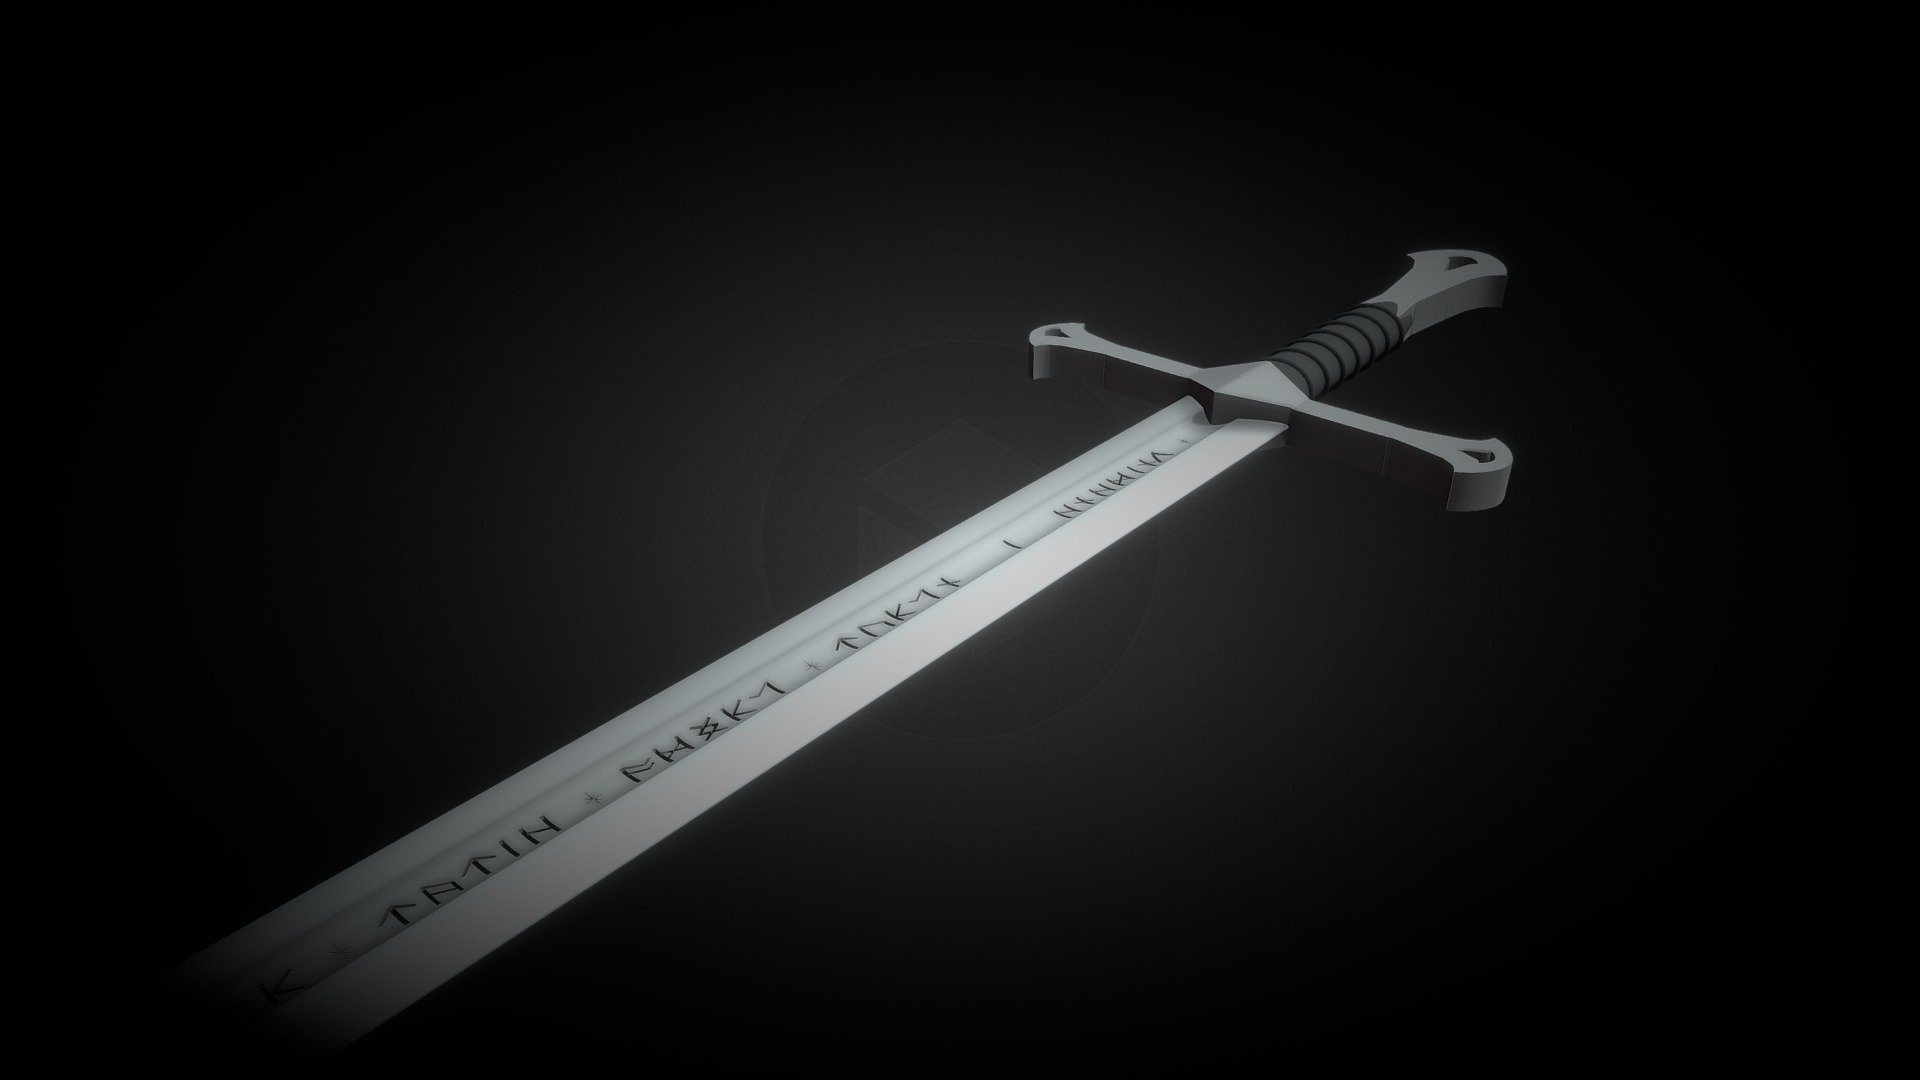 Anduril Sword, Flame of the West, Michael Ironstone's creation, 3D model, 1920x1080 Full HD Desktop